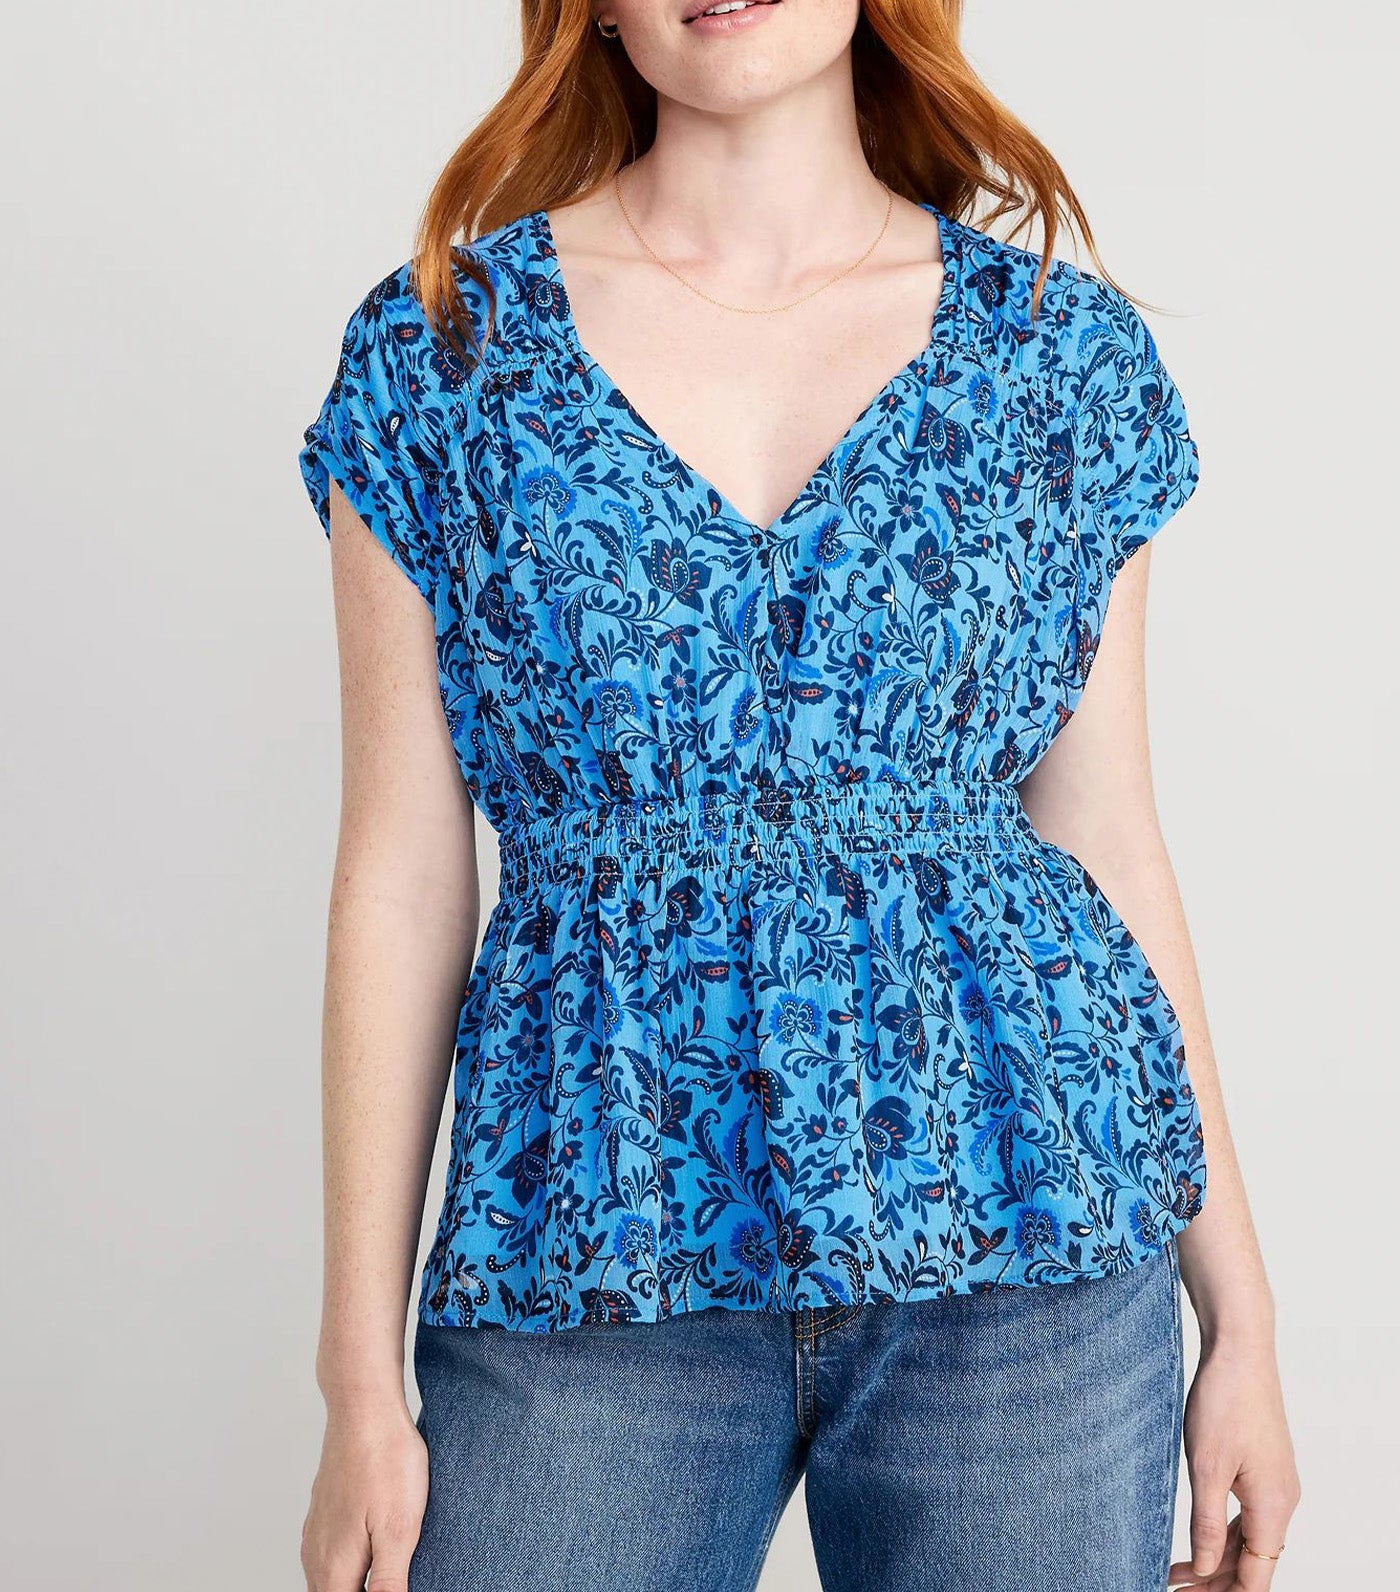 Waist-Defined Printed Dolman-Sleeve Top for Women Blue Floral